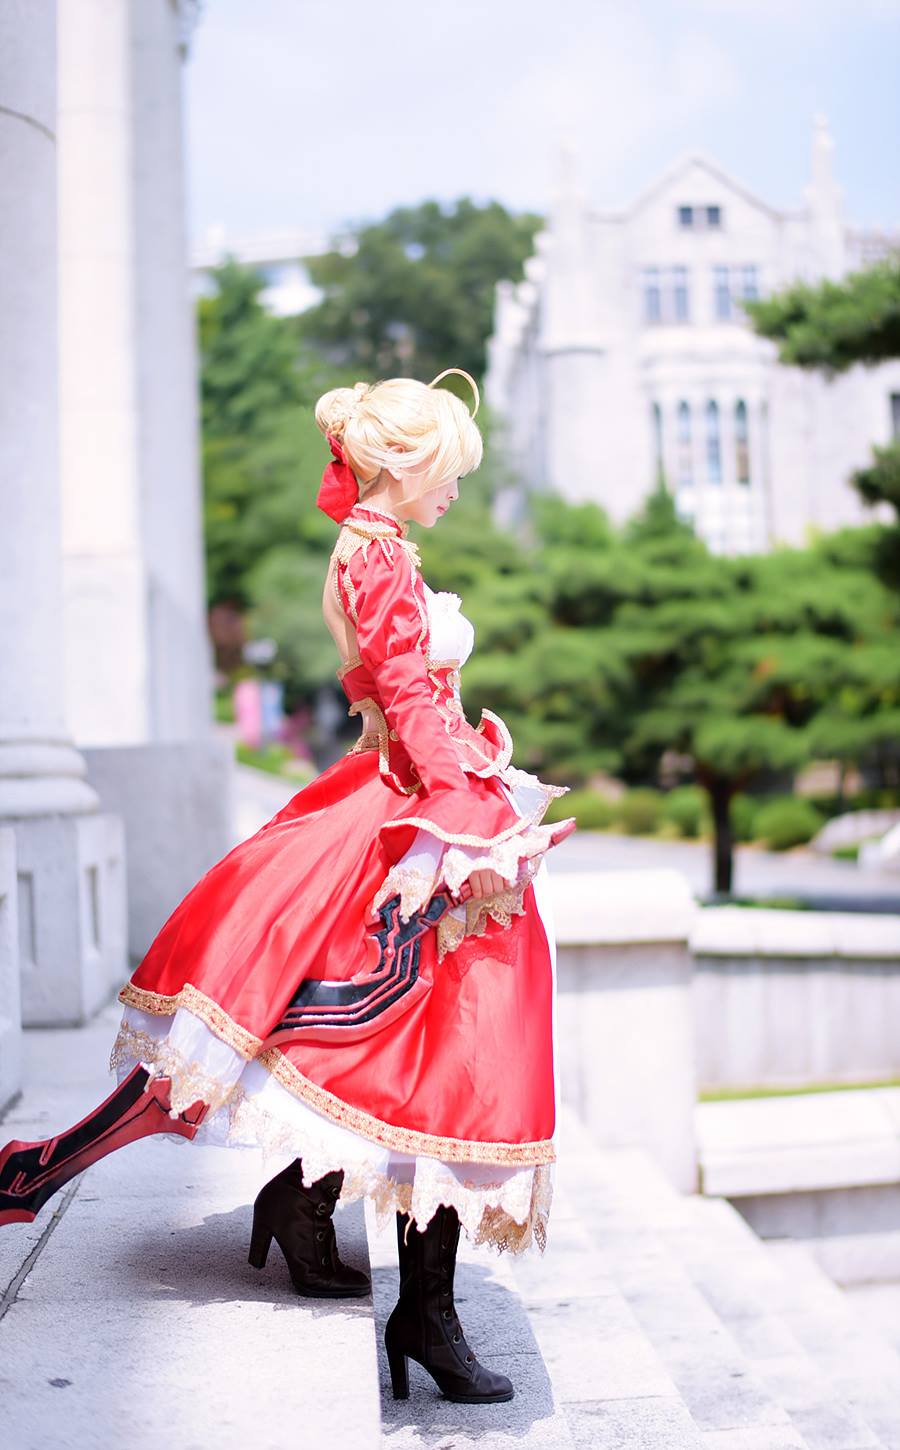 [Tomia] Saber (10th Royal Dress ver.) – Fate╱stay night (2015.06.30)插图(68)